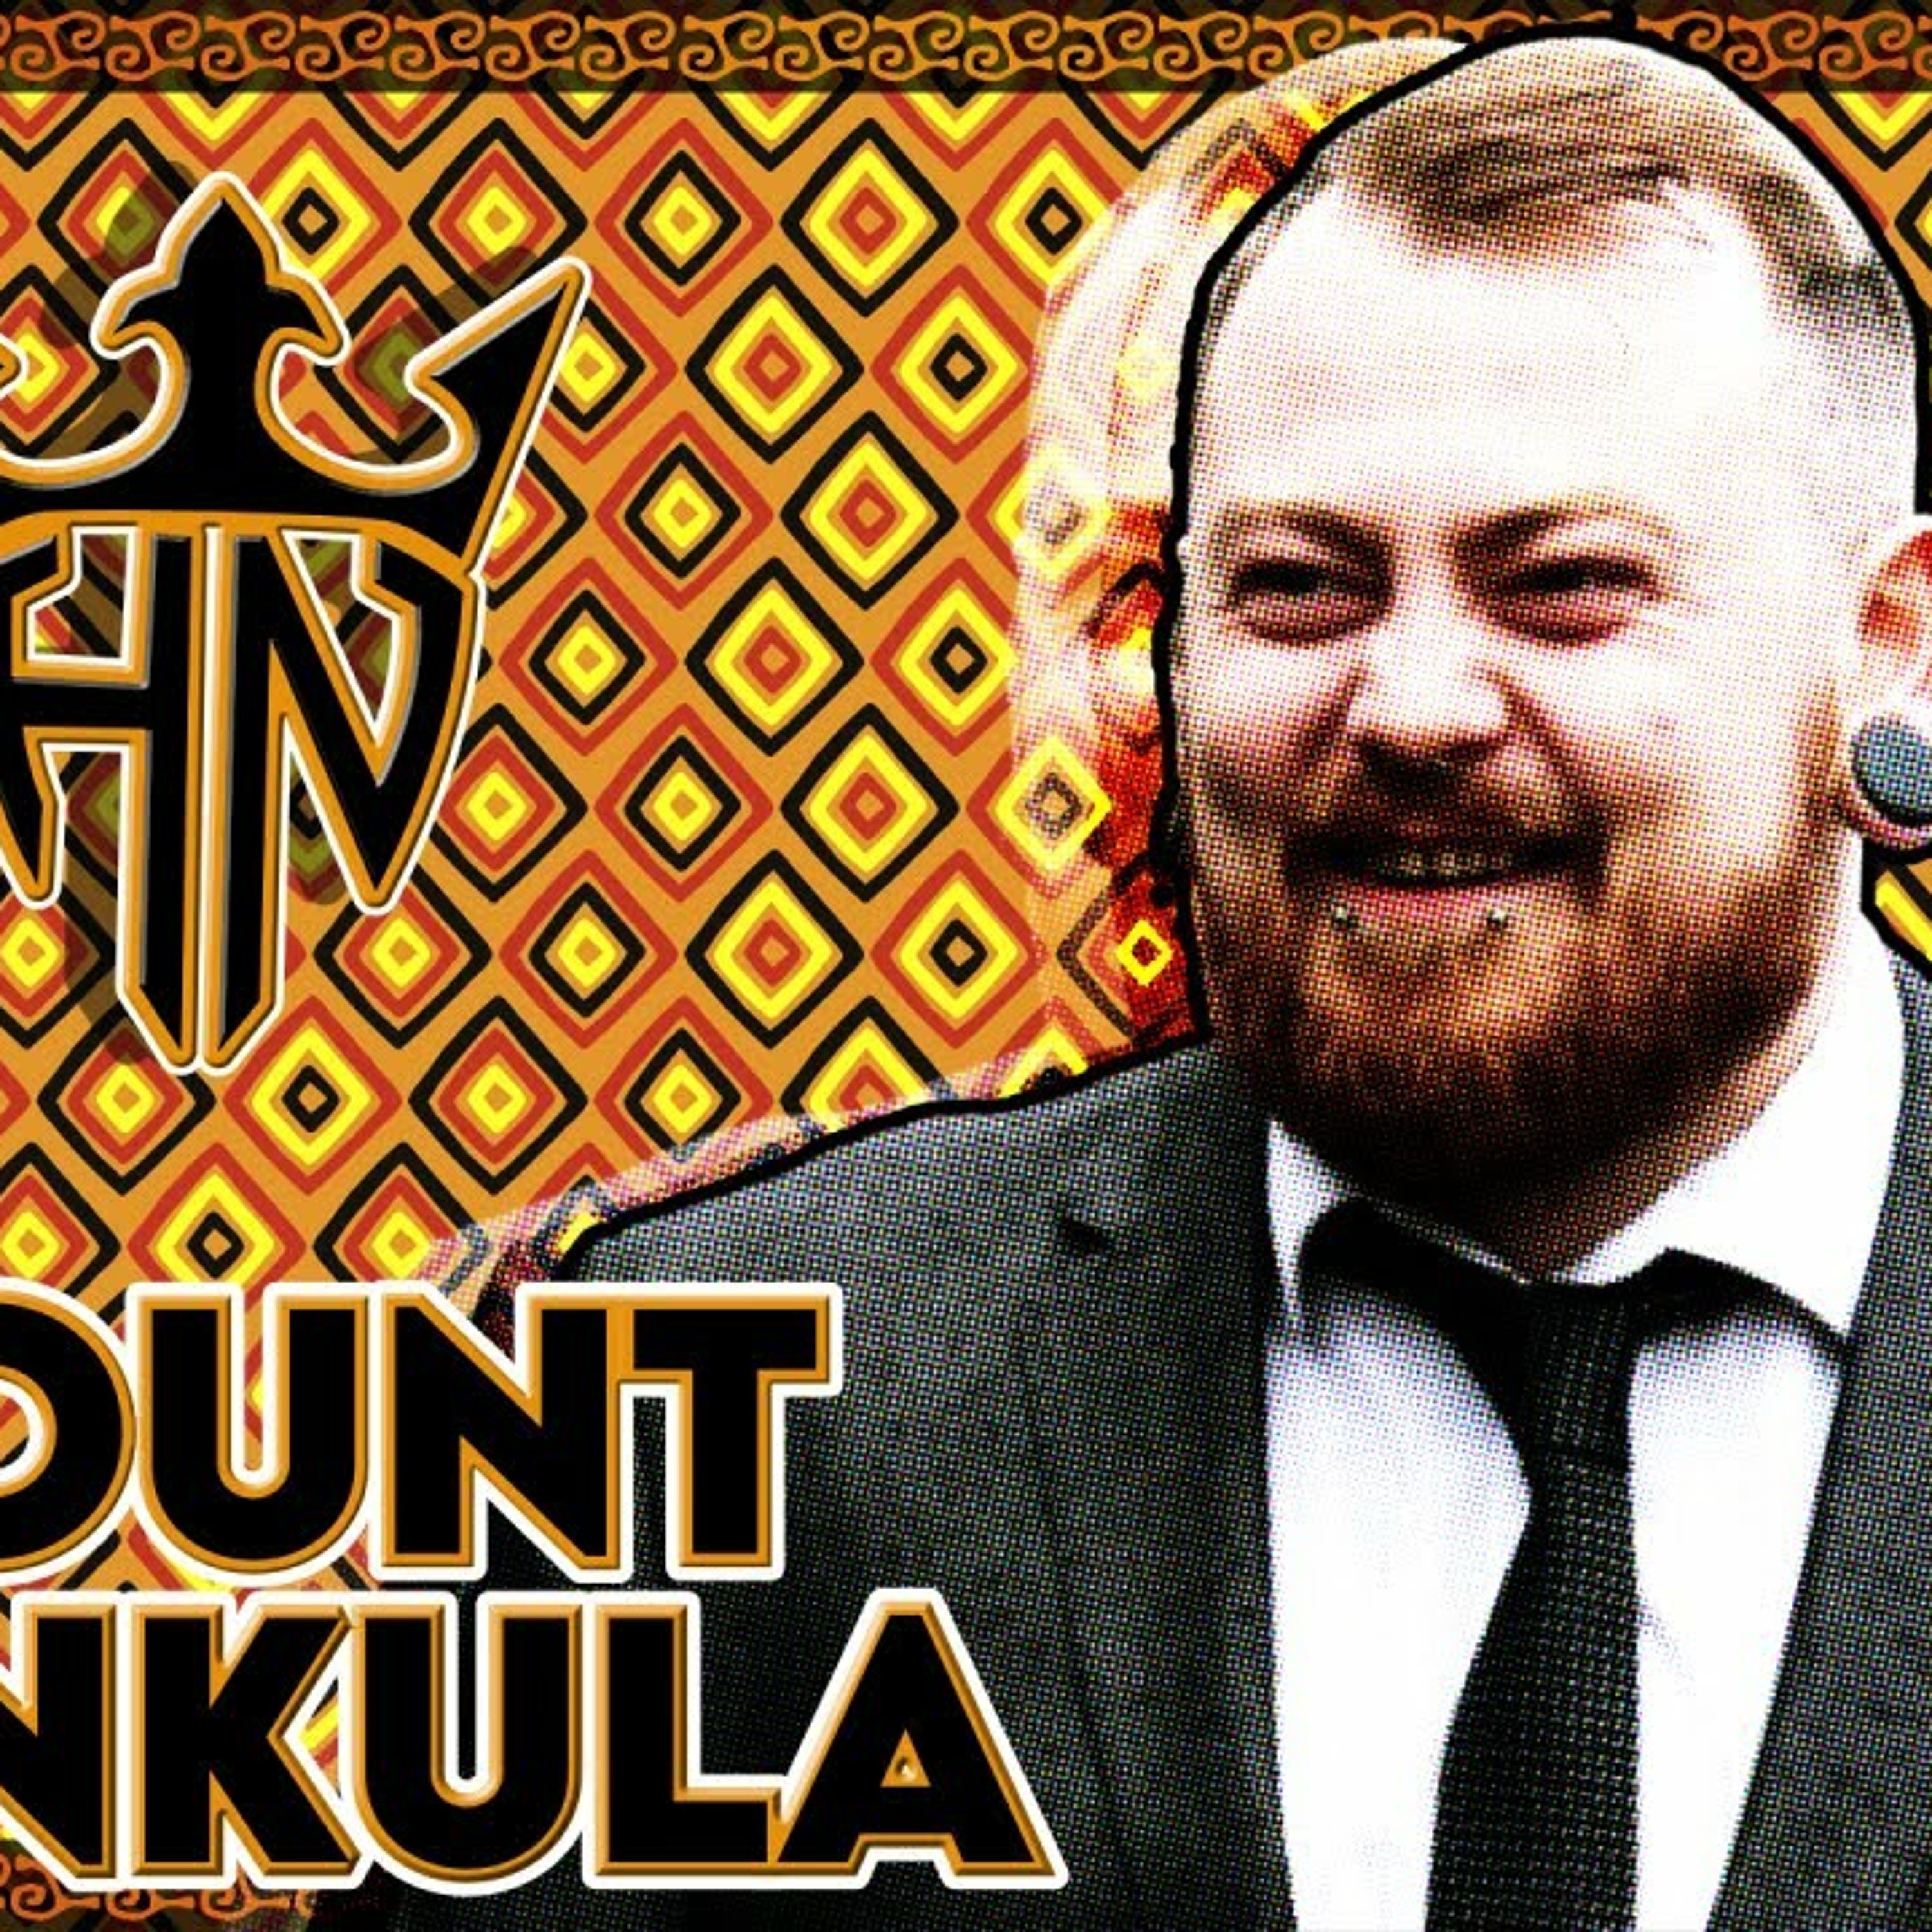 Count Dankula Chat with Hotep Jesus